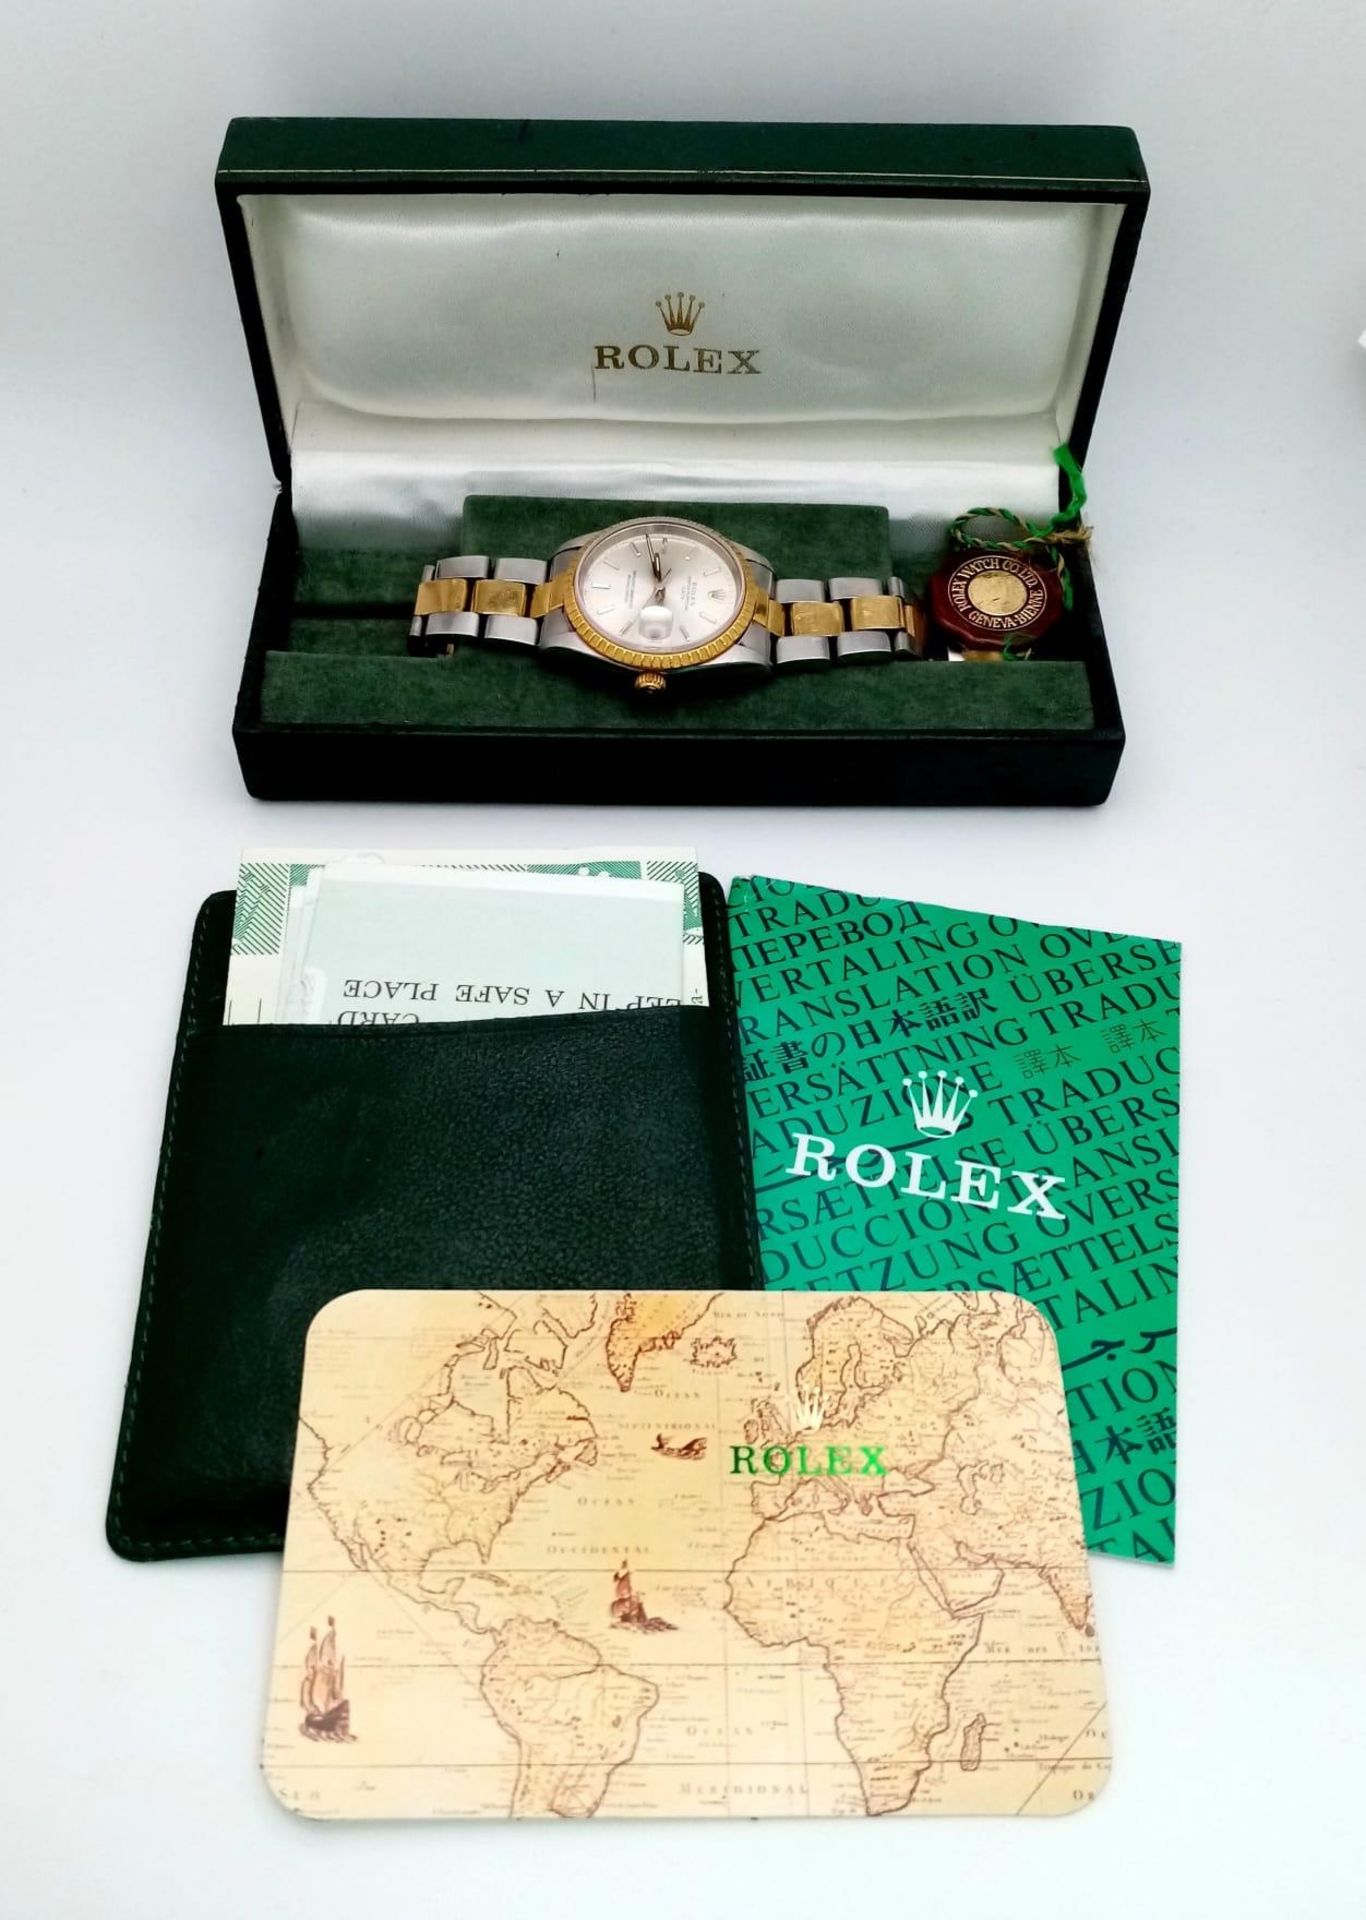 THE CLASSIC ROLEX OYSTER PERPETUAL DATE AUTOMATIC BI-METAL GENTS WATCH WITH TASTEFUL SILVERTONE DIAL - Image 14 of 19